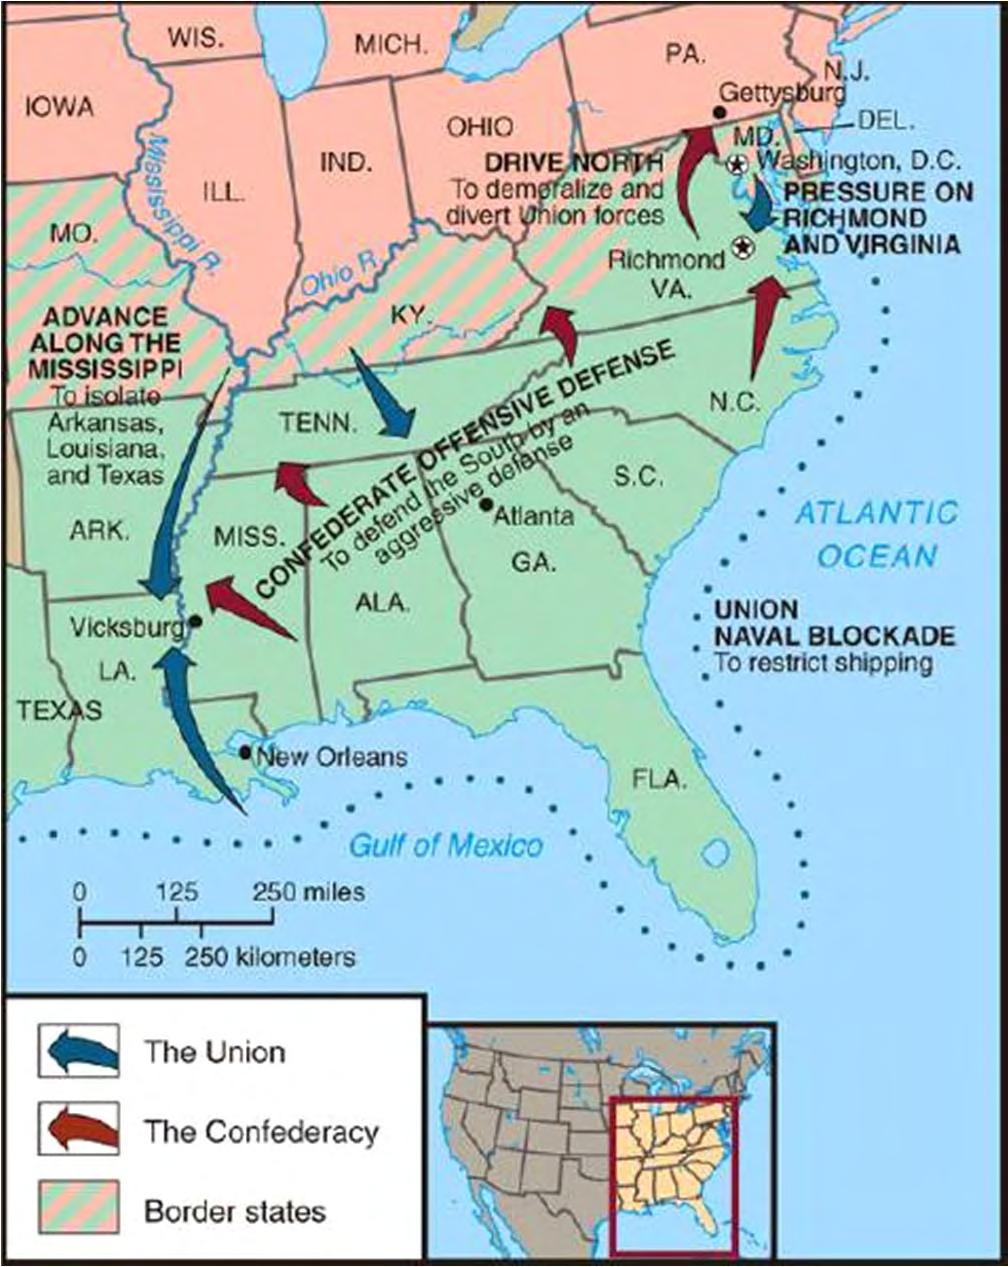 NORTH S MILITARY STRATEGY The Anaconda Plan Surround the Confederacy and squeeze them into submission Capture Richmond and force surrender Expel Confederates from border states Control of